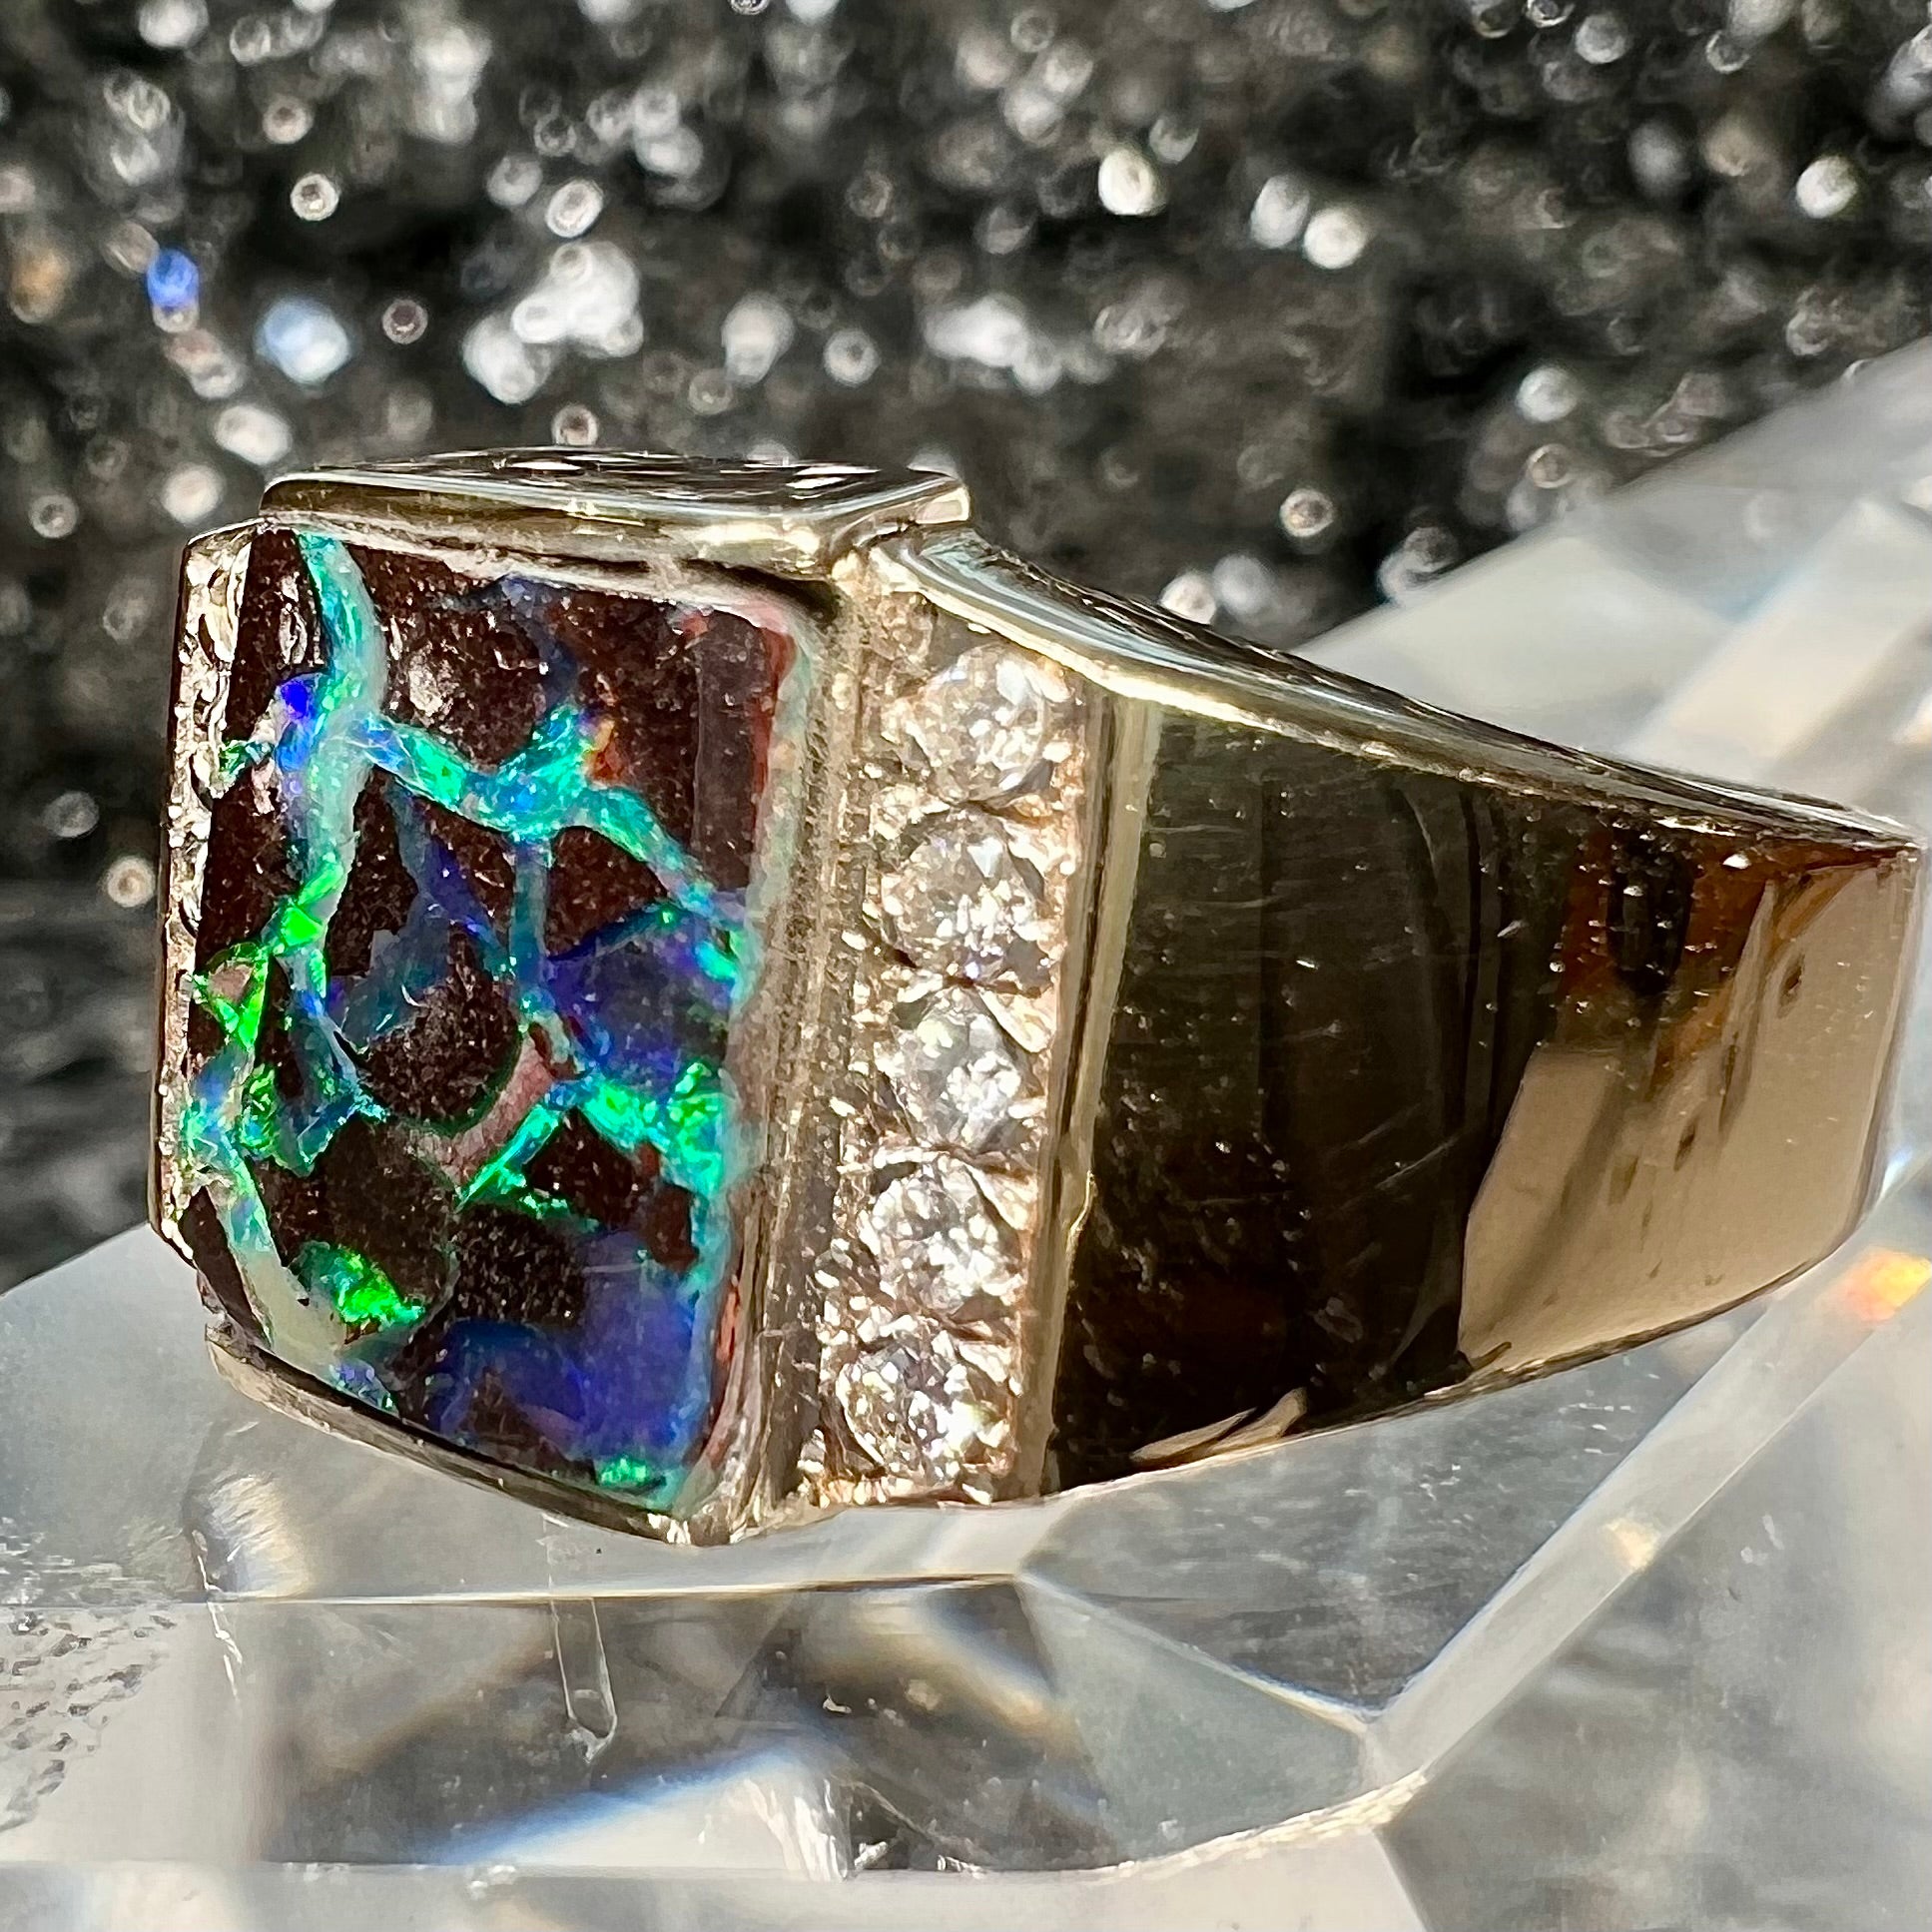 A men's gold boulder opal and diamond ring.  The opal shows blue and green colors.